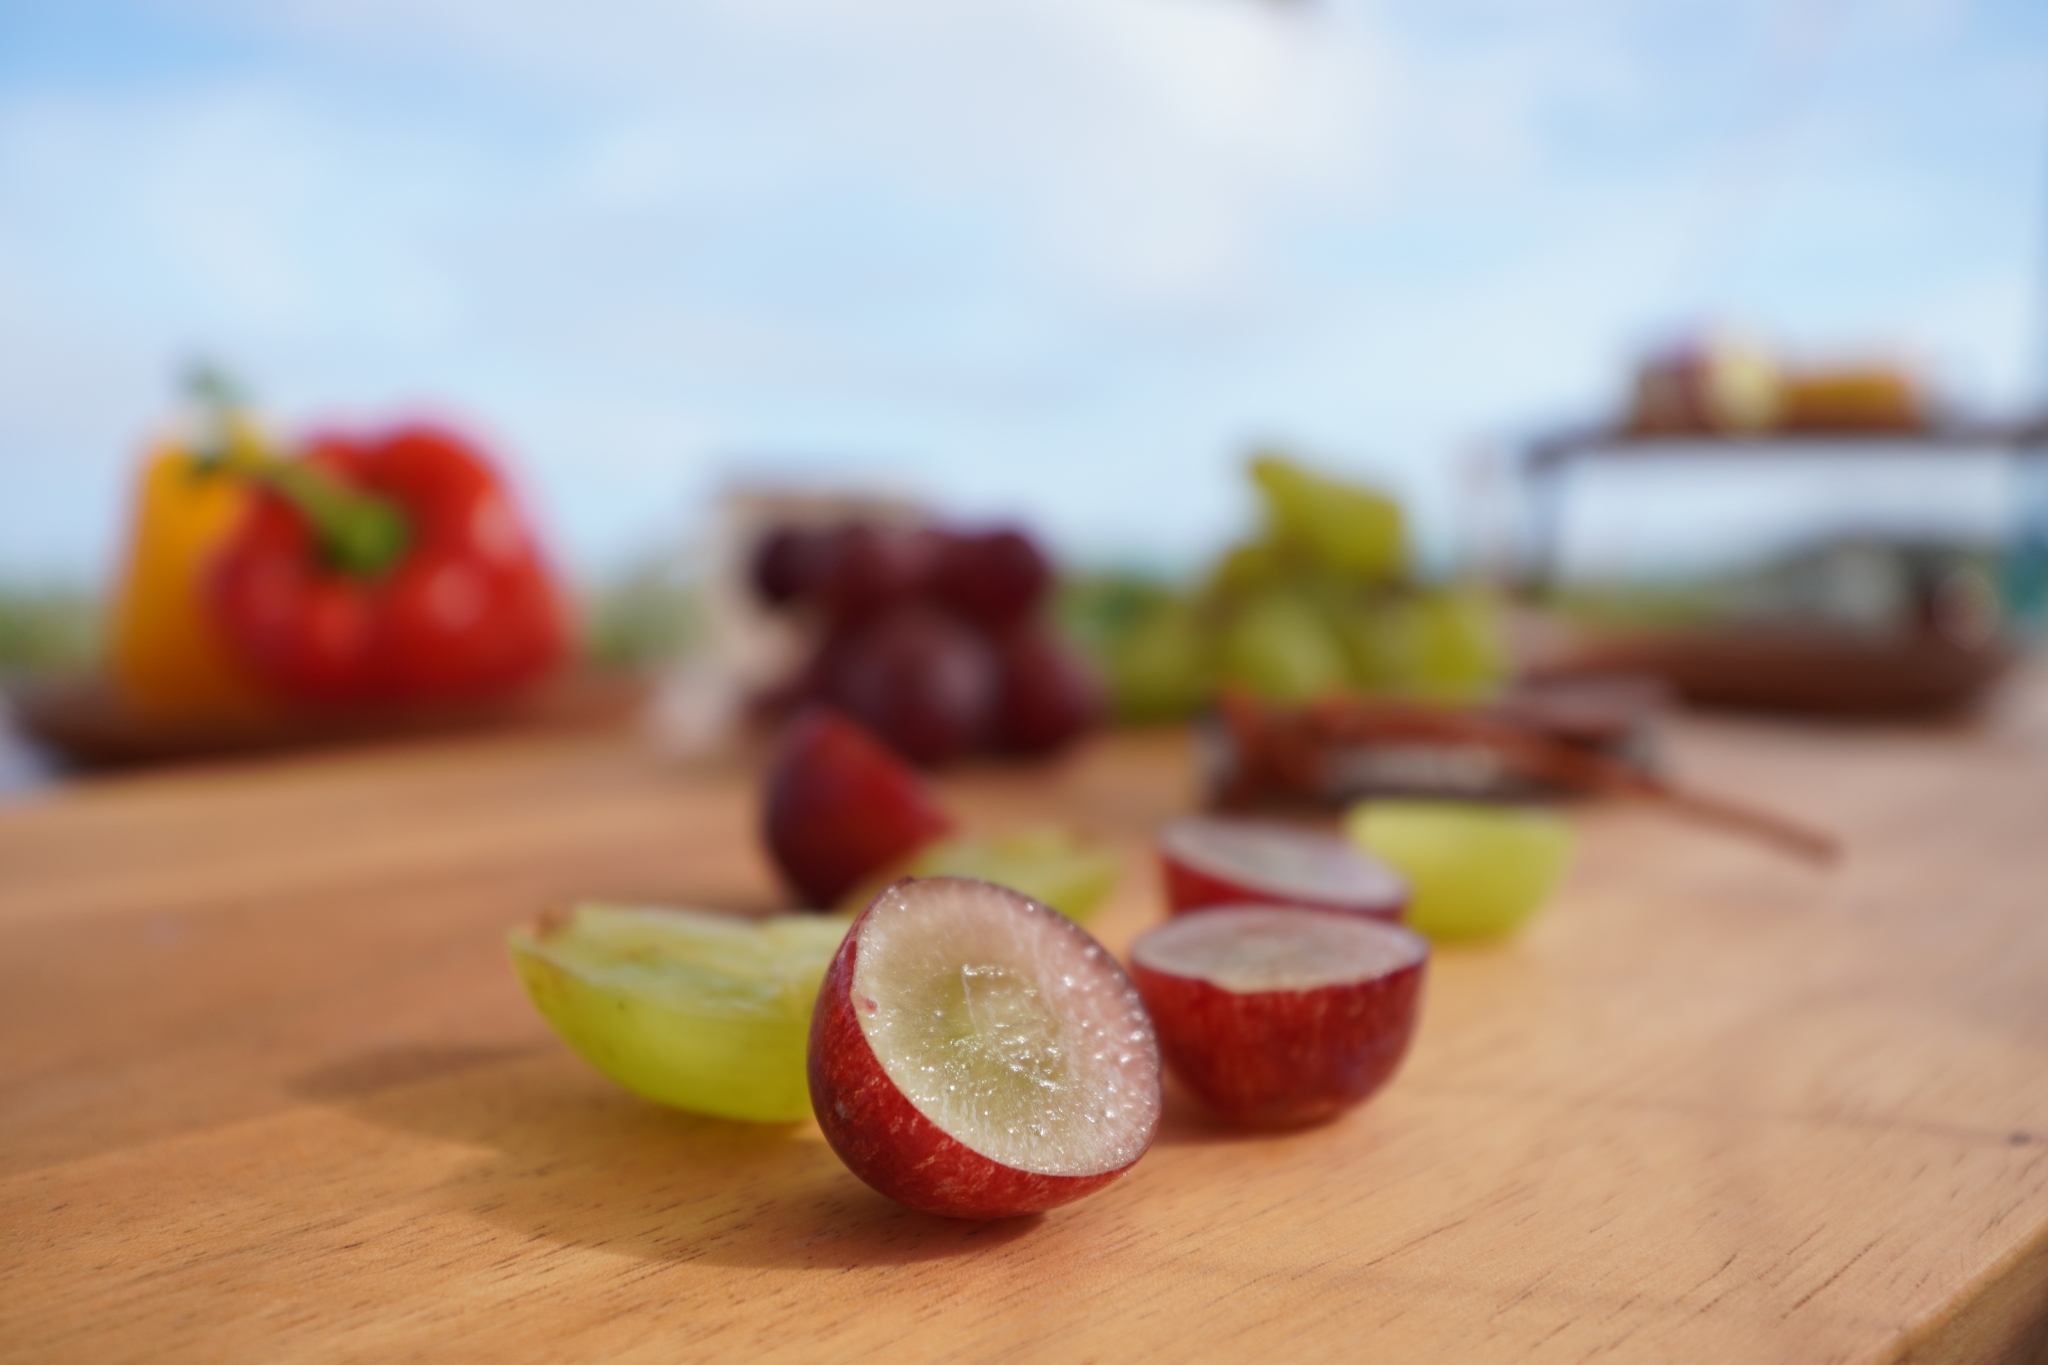 Slices grapes with other fruits in bokeh background